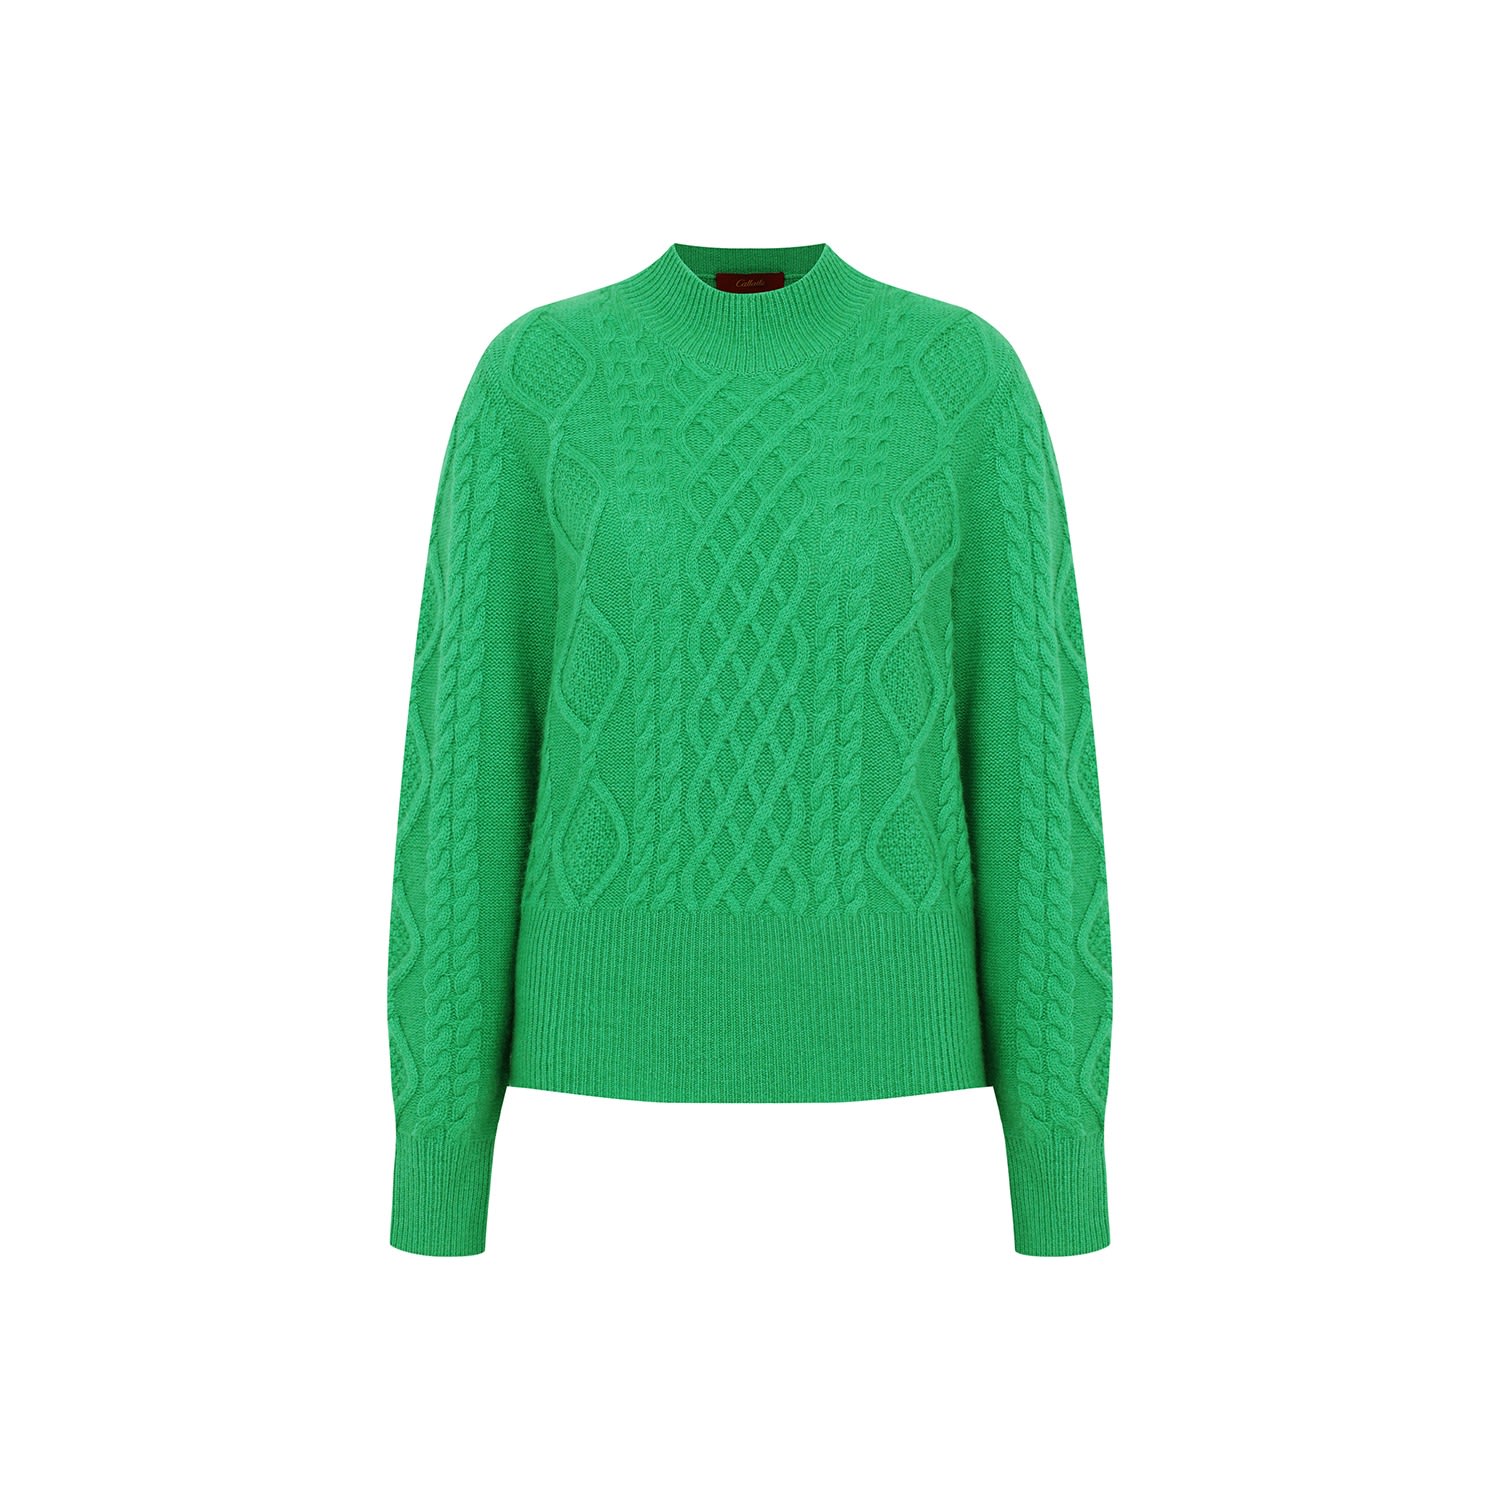 Women’s Cable-Knit Cashmere Turtleneck Sweater, Green Small Callaite